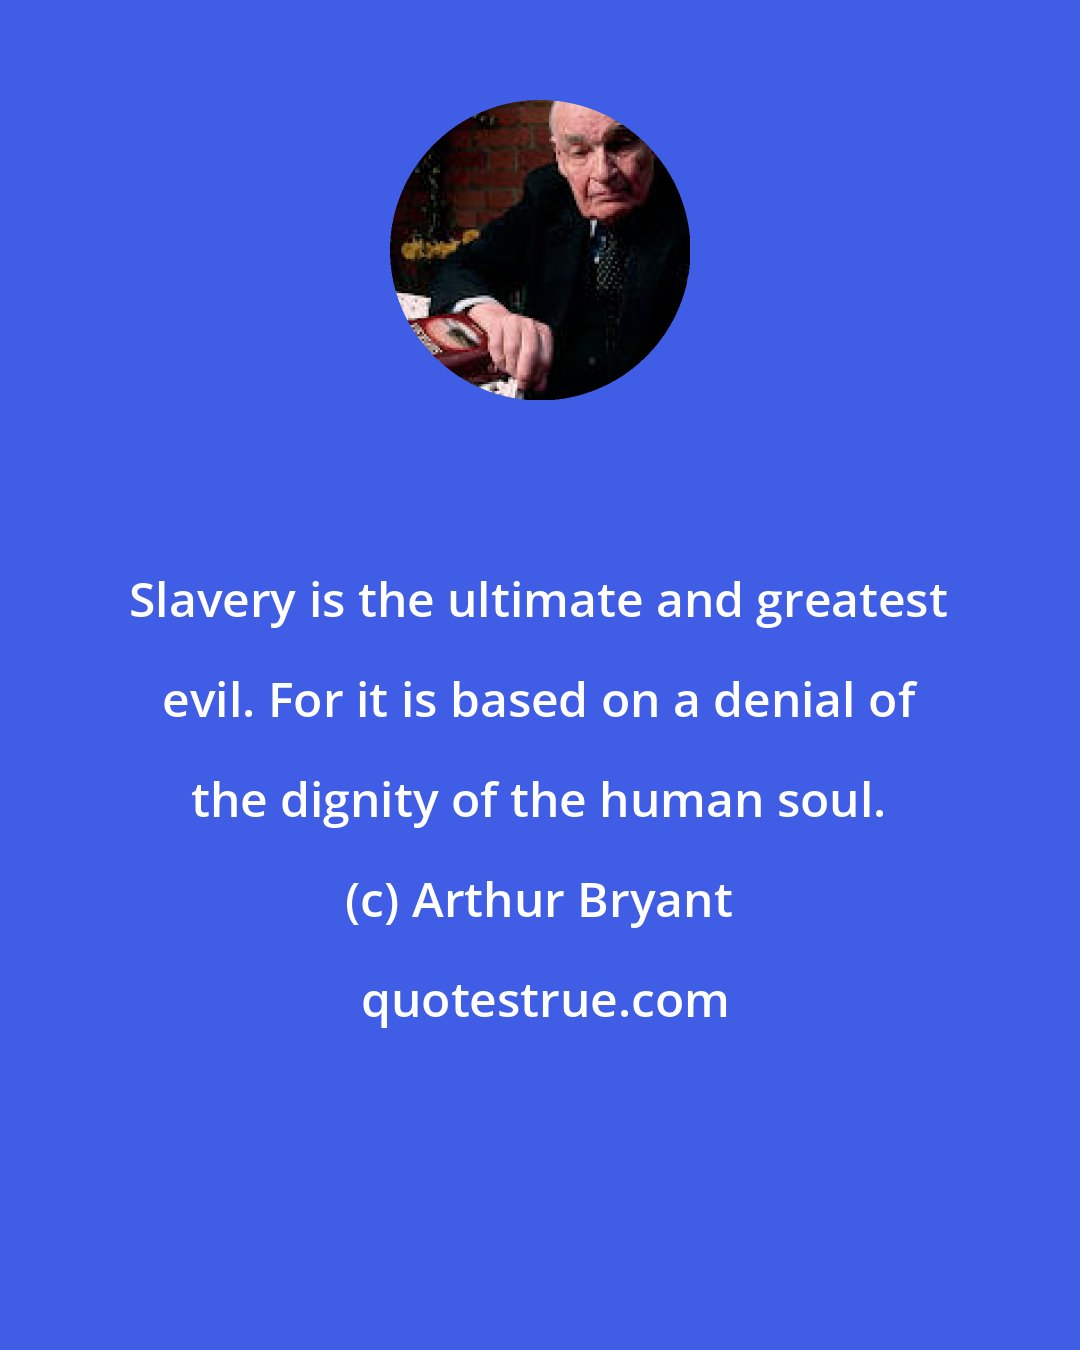 Arthur Bryant: Slavery is the ultimate and greatest evil. For it is based on a denial of the dignity of the human soul.